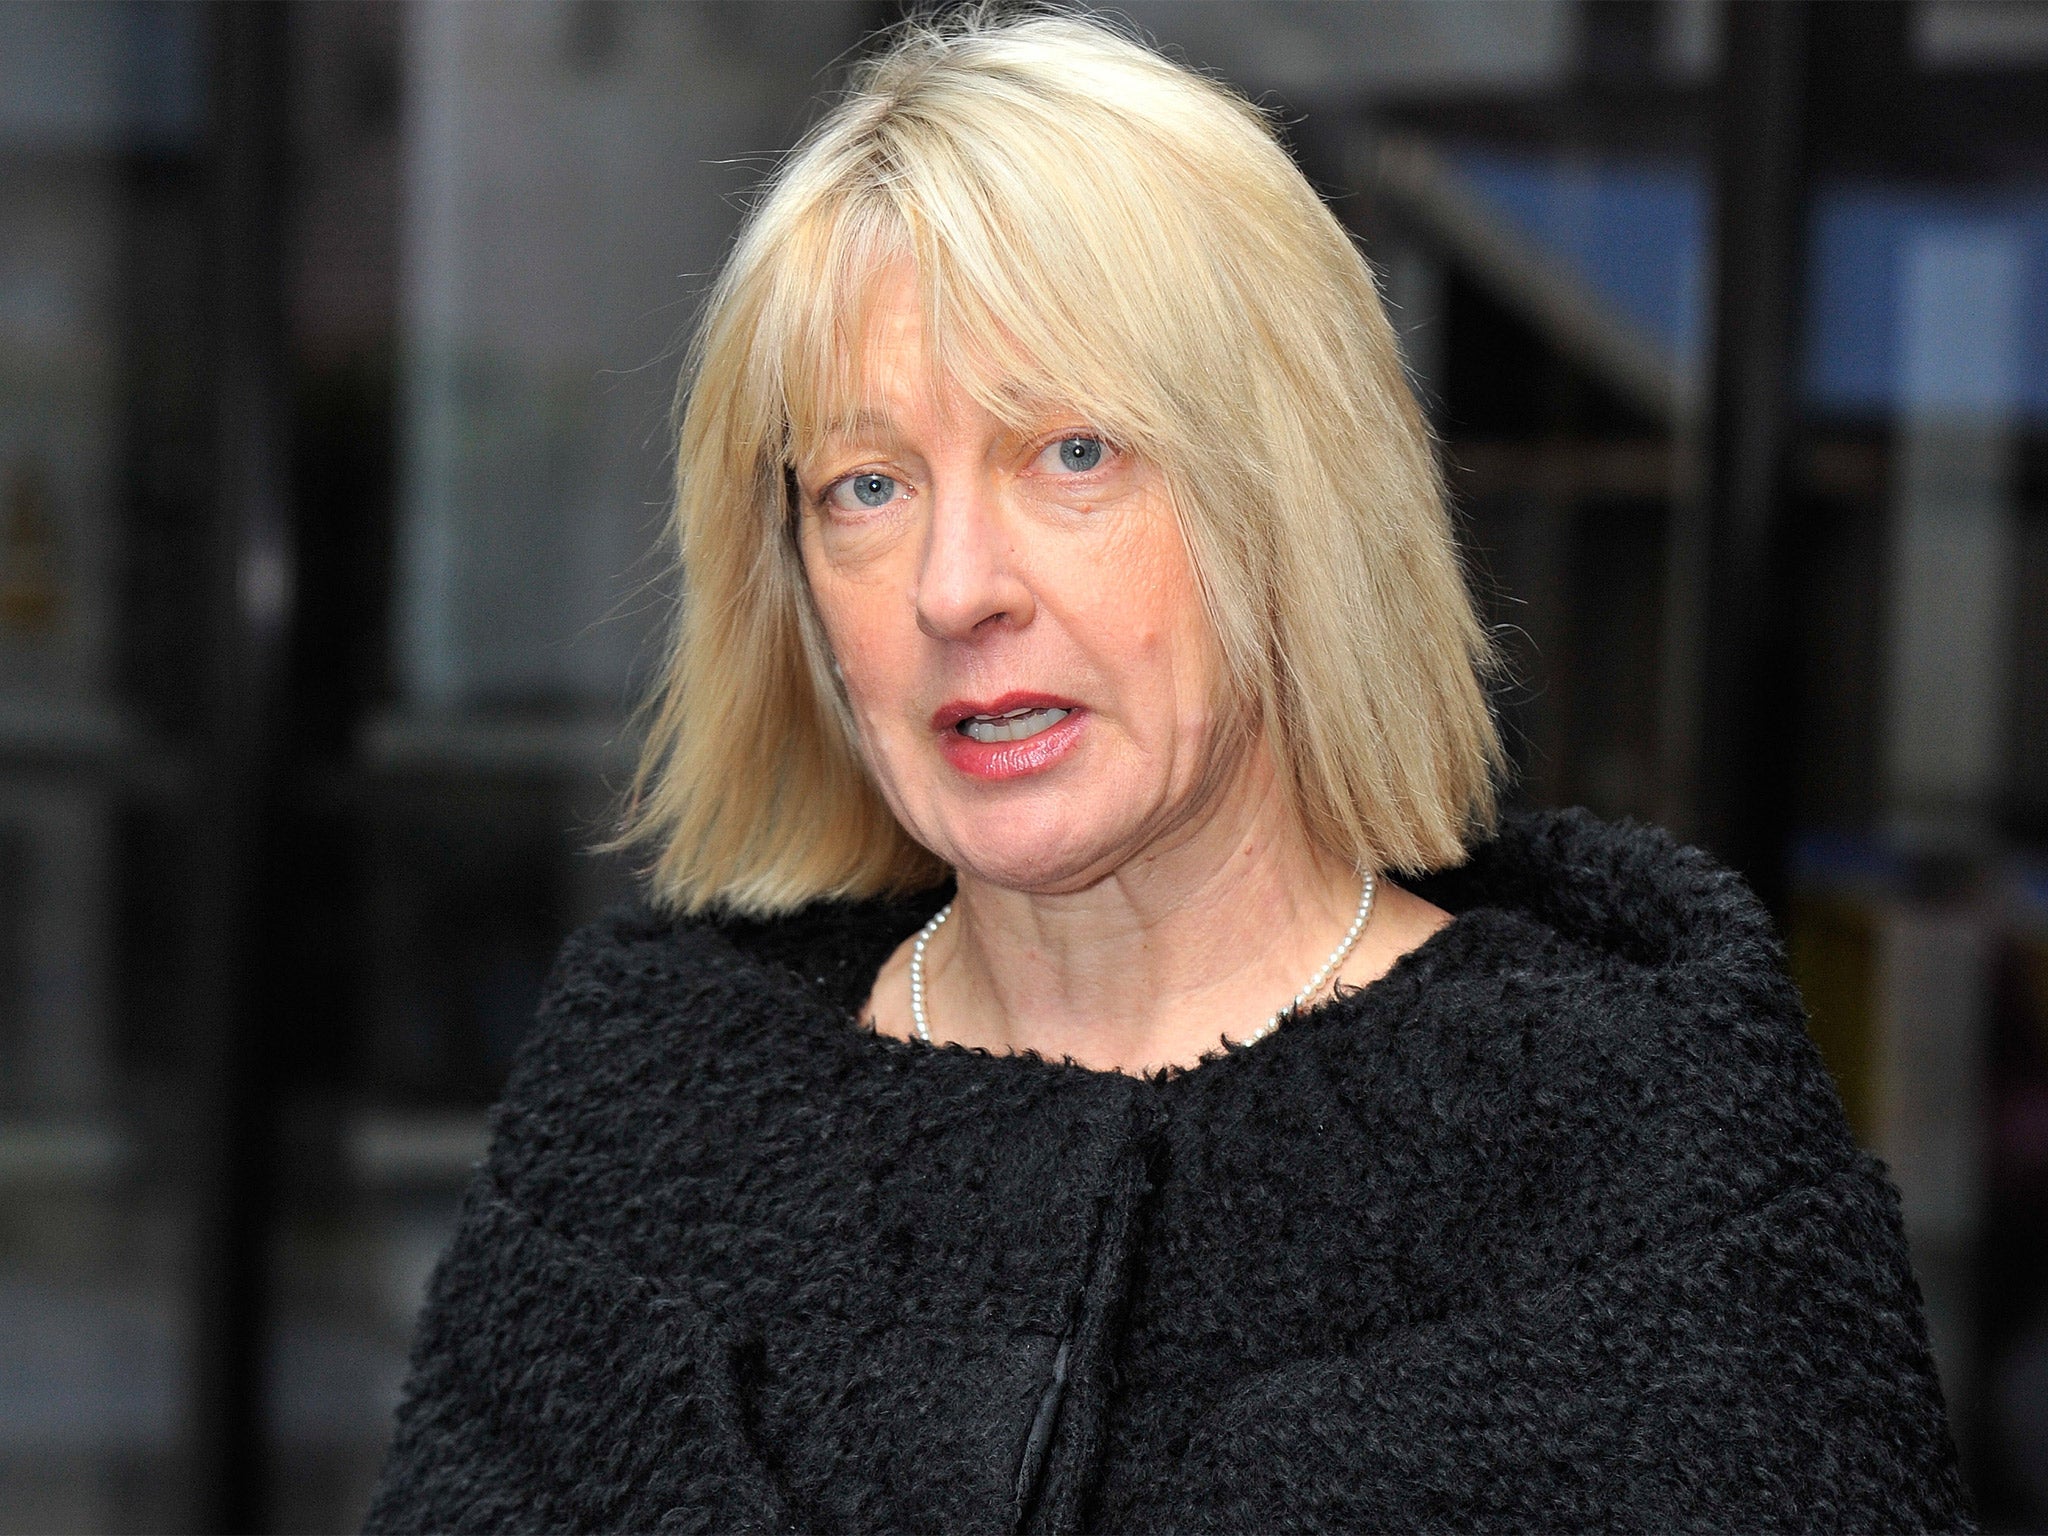 Claire Moreland, headteacher of Chetham’s School of Music, is resigning after 17 years in charge